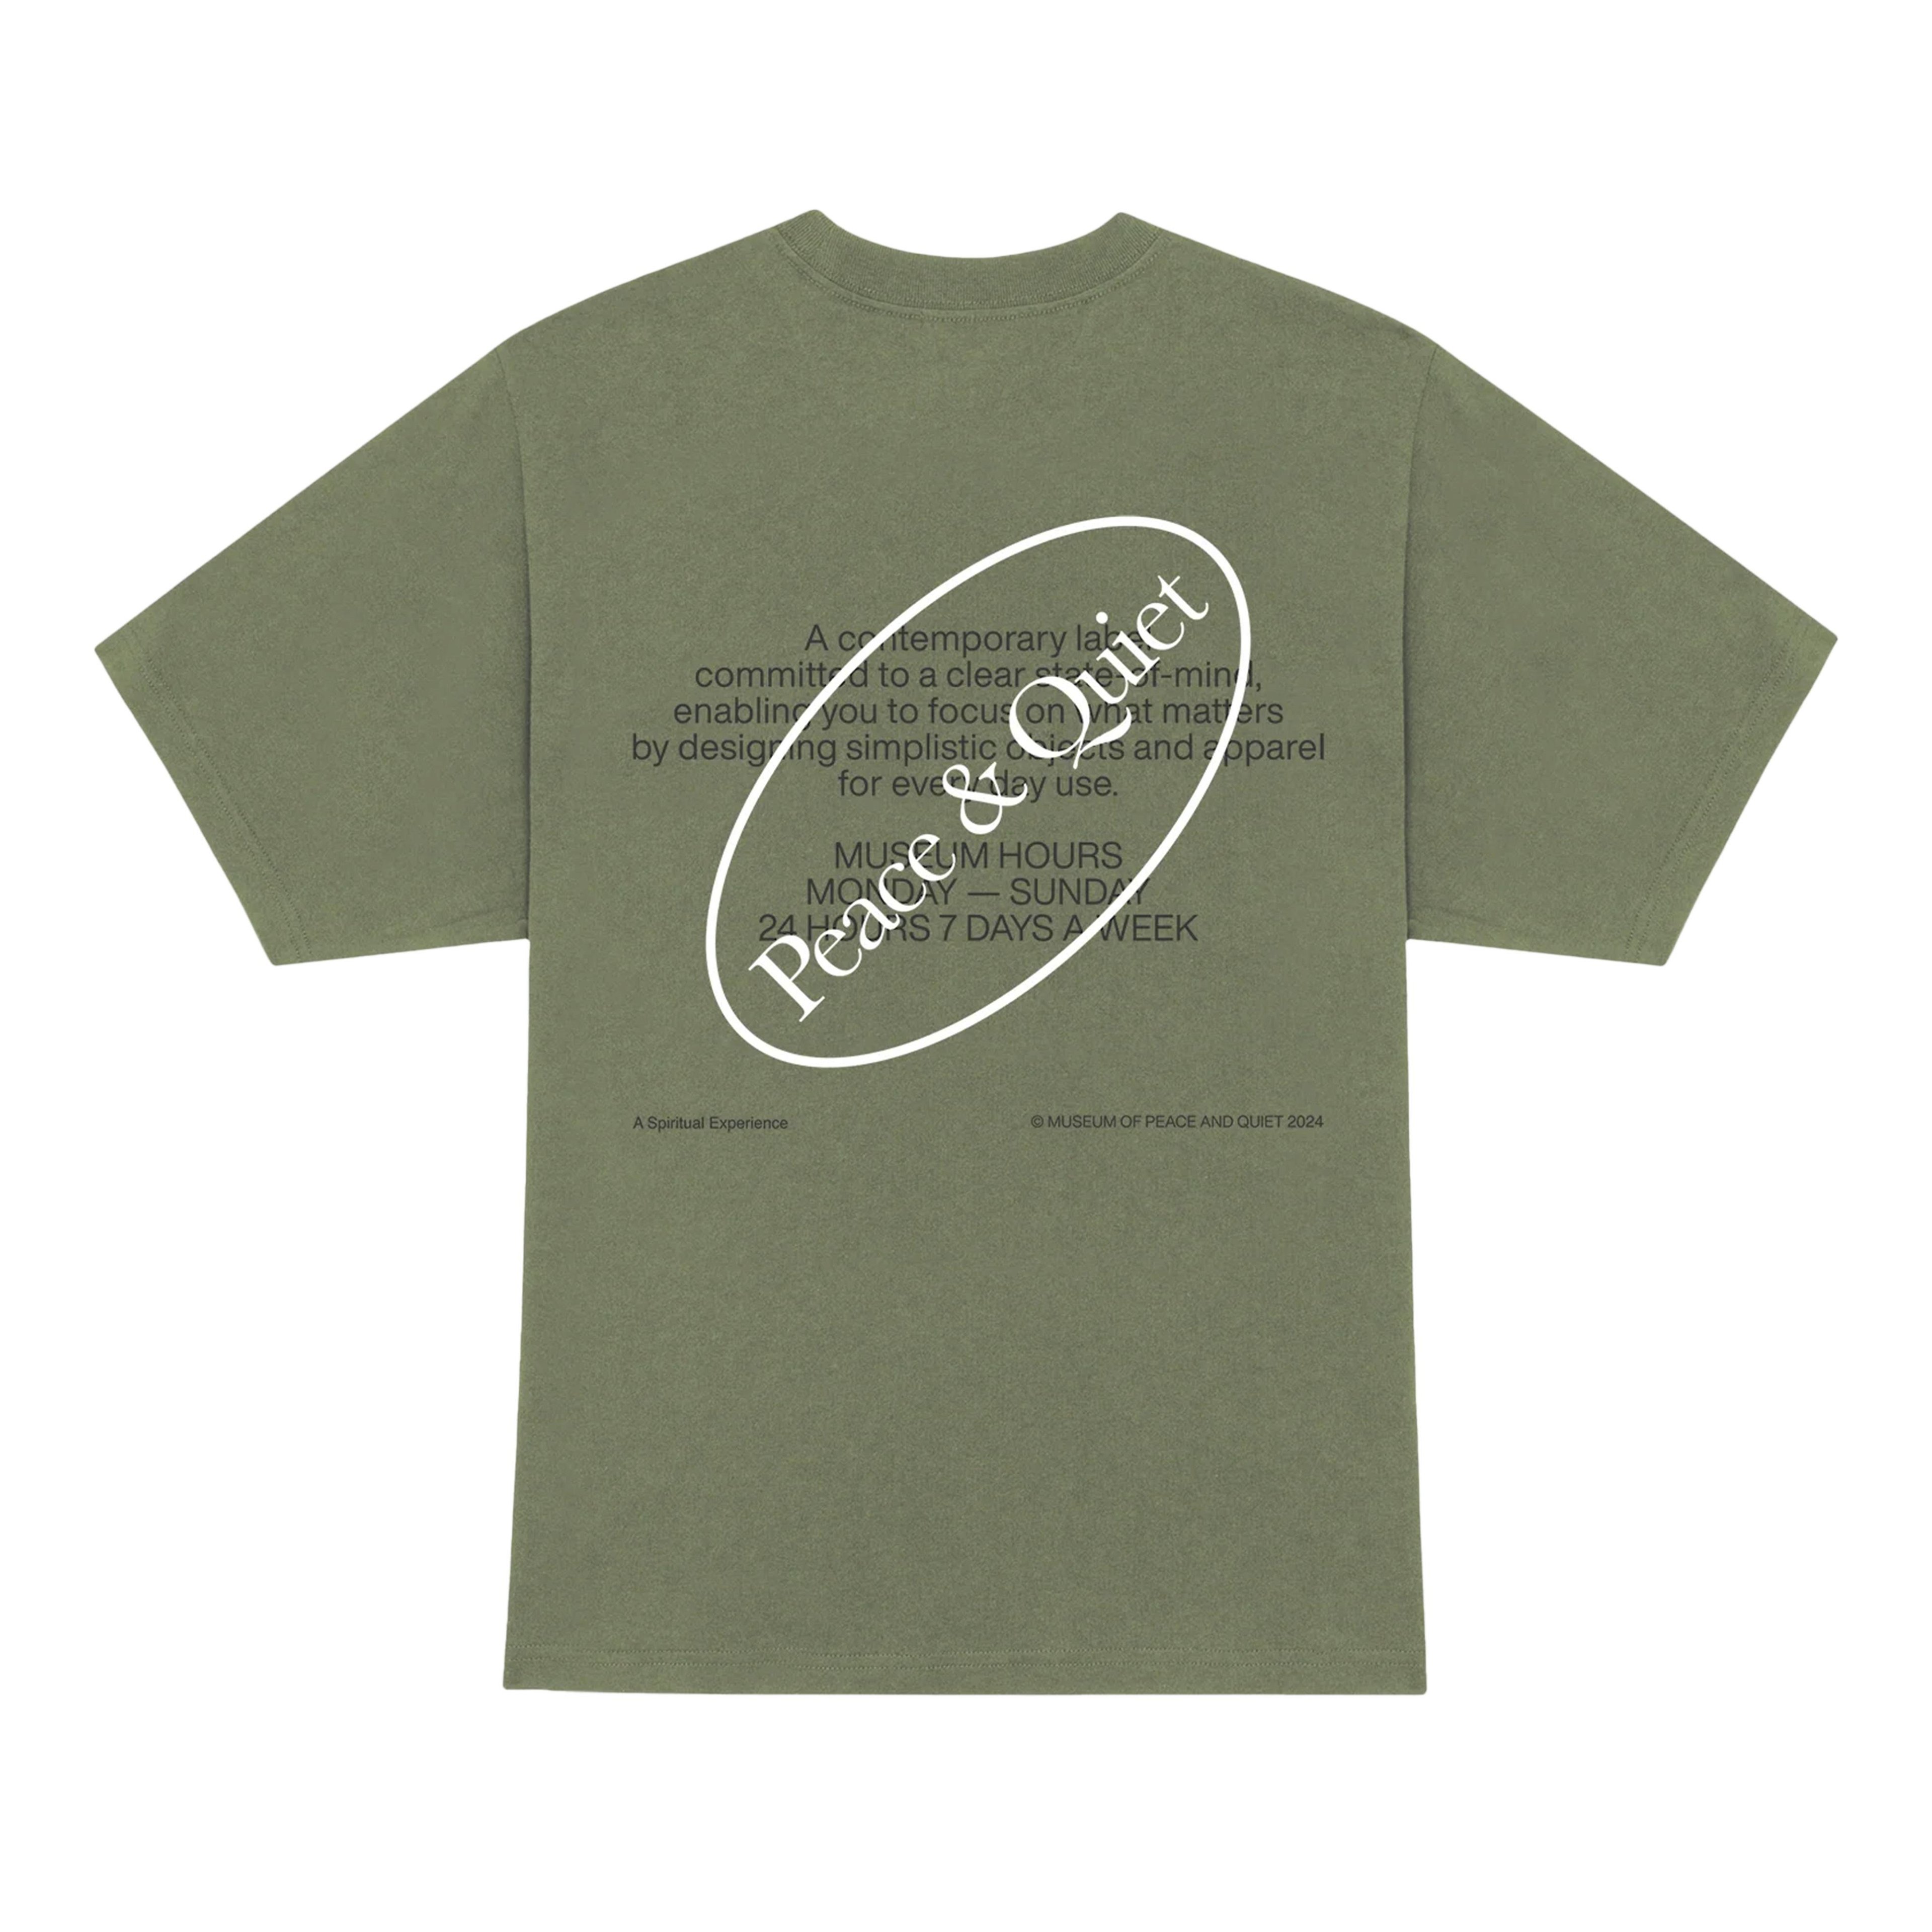 MUSEUM OF PEACE AND QUIET - Museum Hours T-Shirt - (Olive) by MUSEUM OF PEACE&QUIET